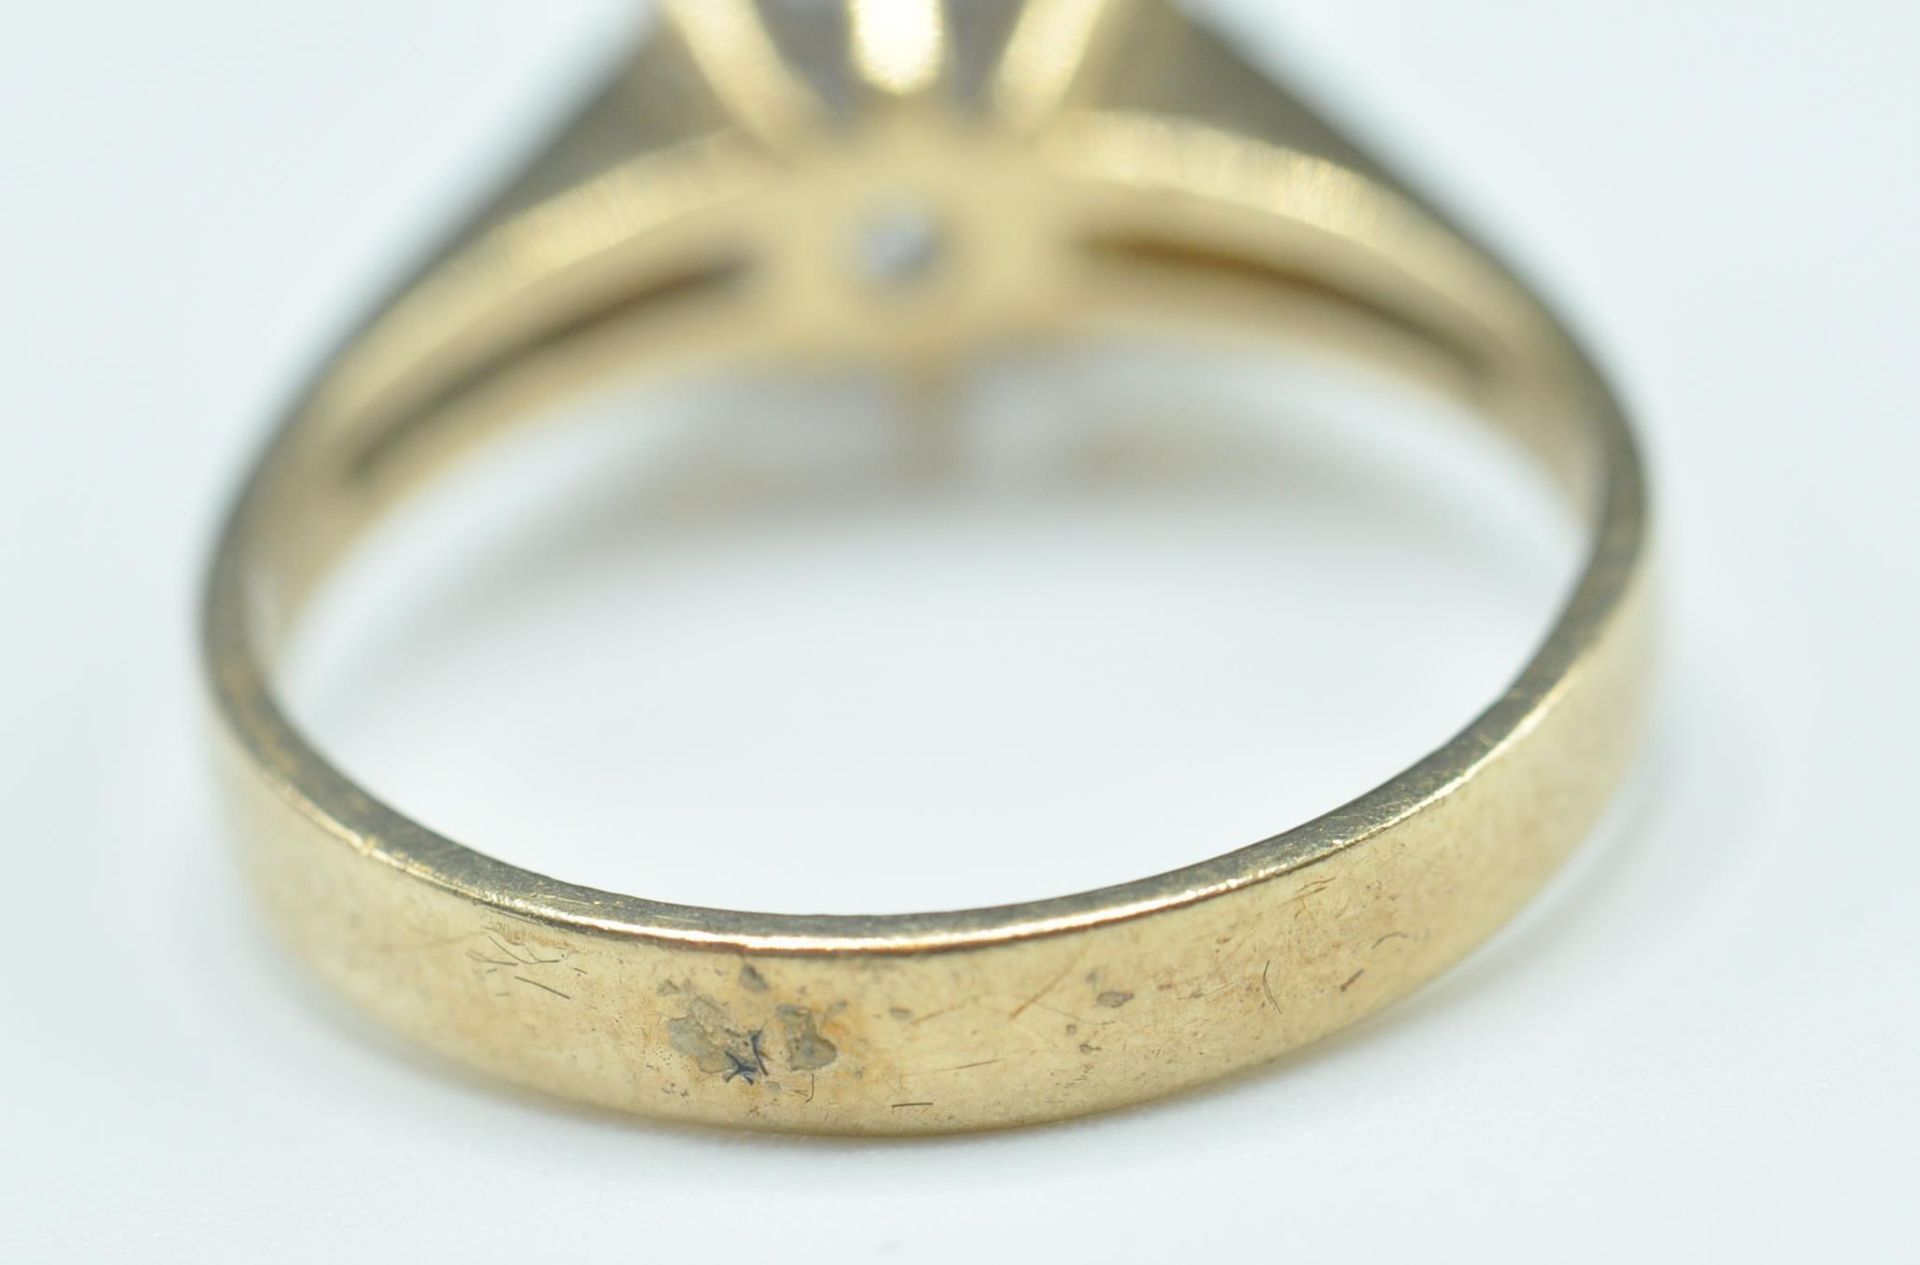 YELLOW GOLD AND DIAMOND RING - Image 6 of 8